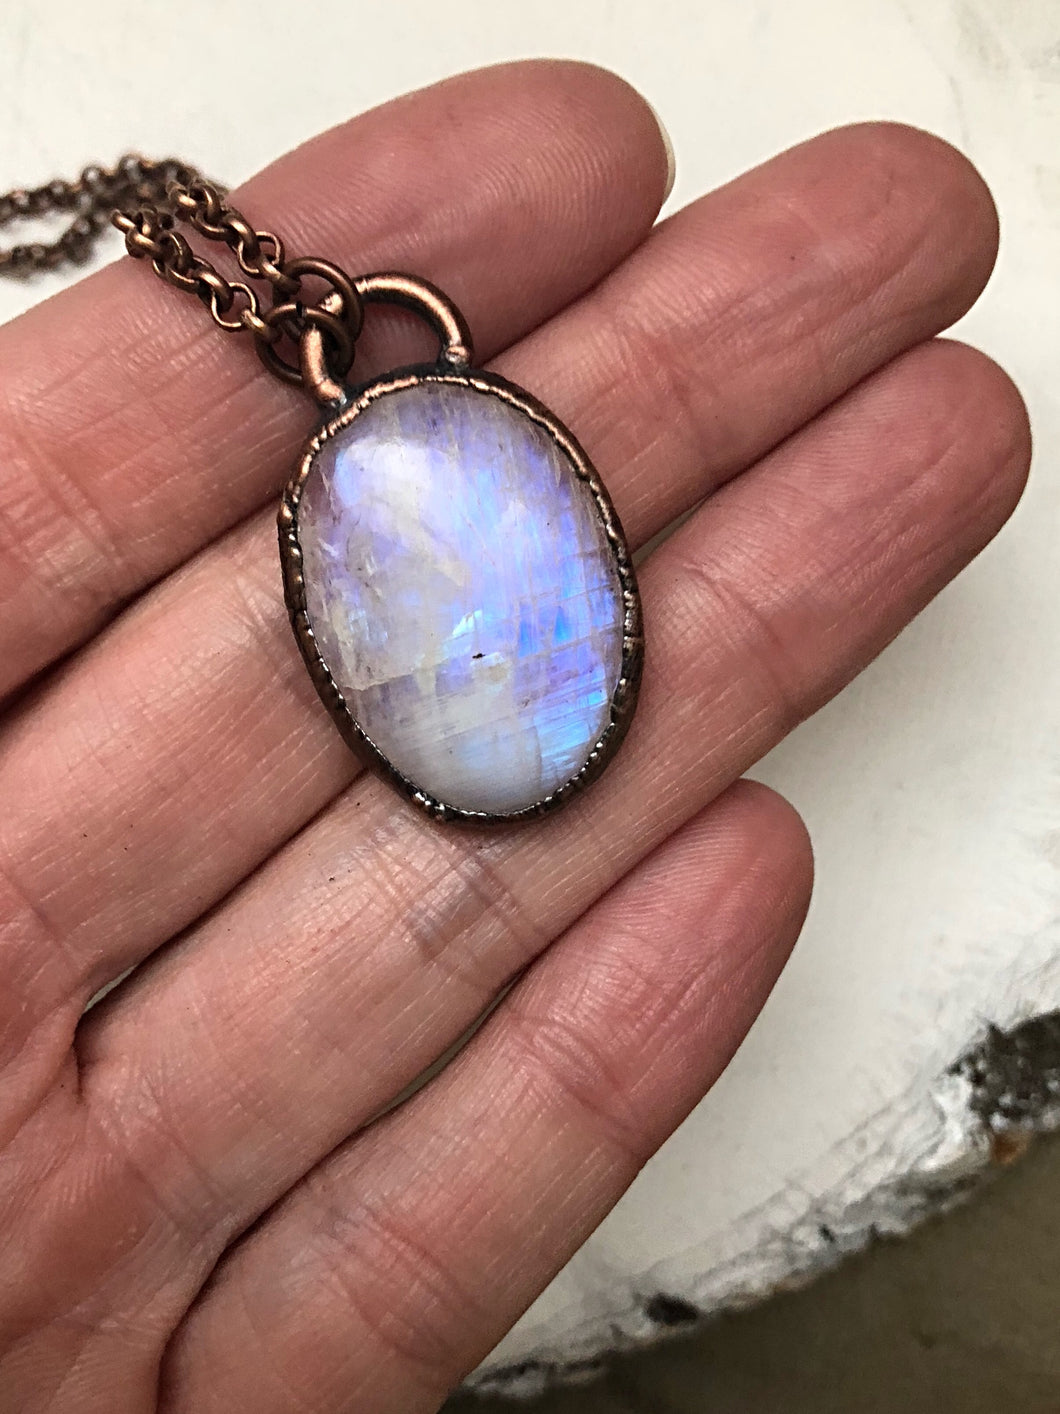 Rainbow Moonstone Necklace #1 - Ready to Ship (5/17 Update)